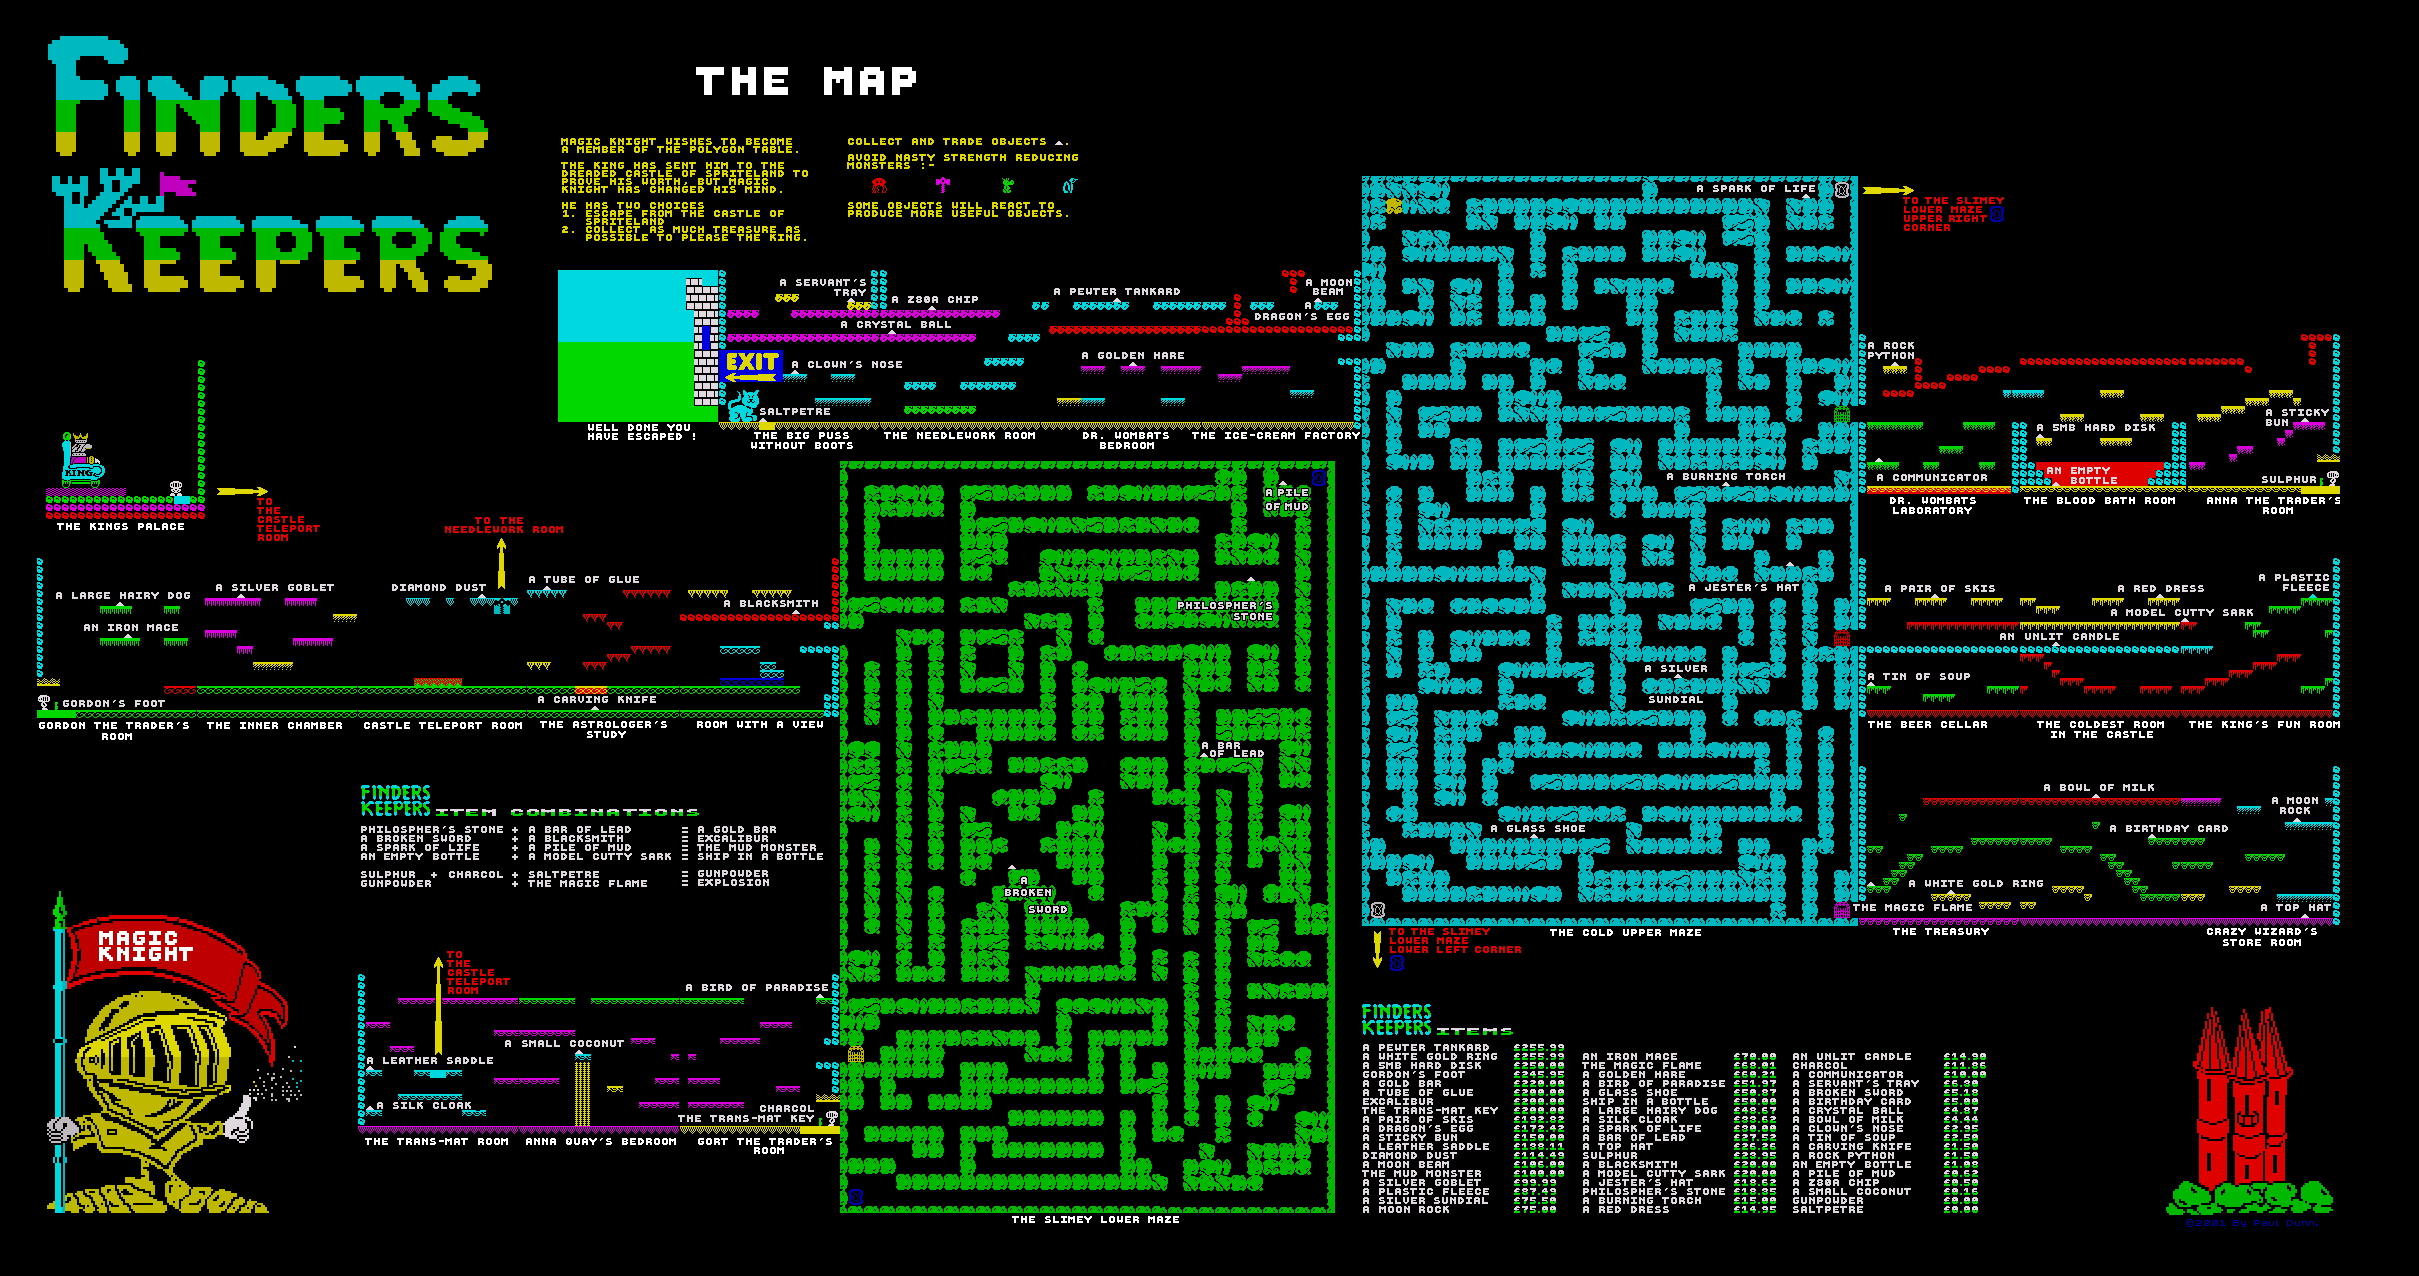 Finders Keepers - The Map